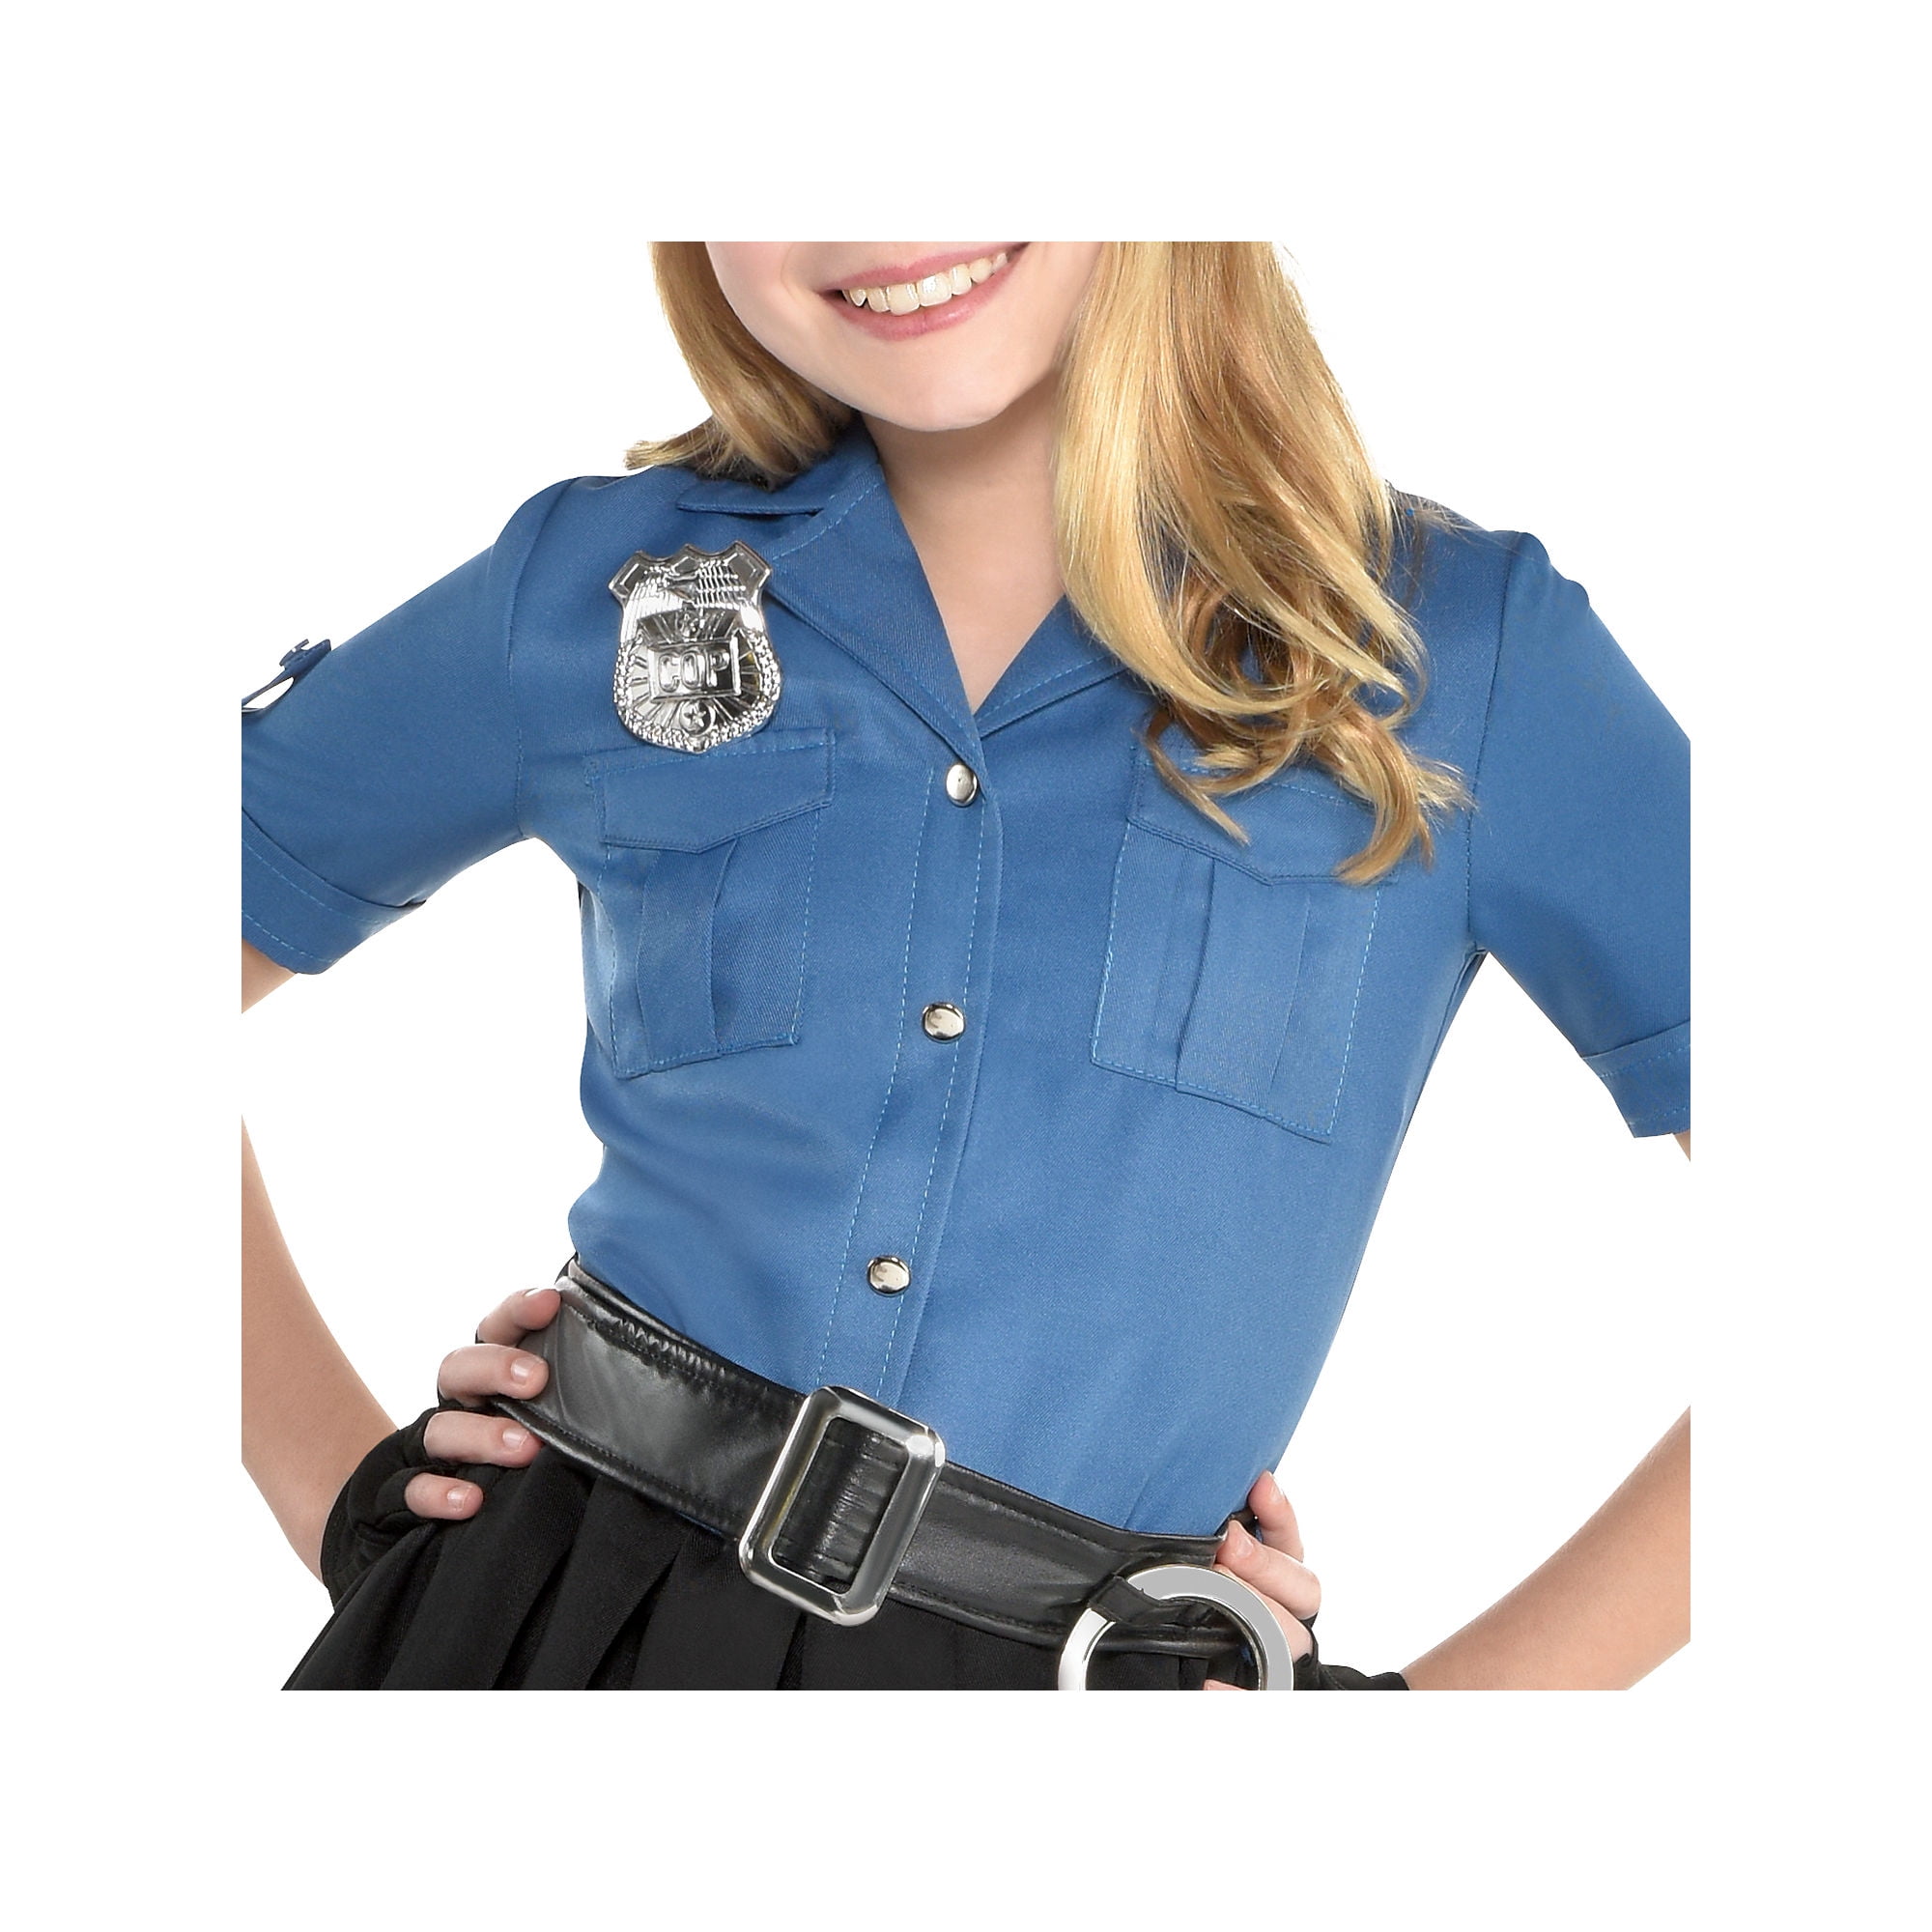 making a full version of cop cuties (except im cute and on duty) #copc